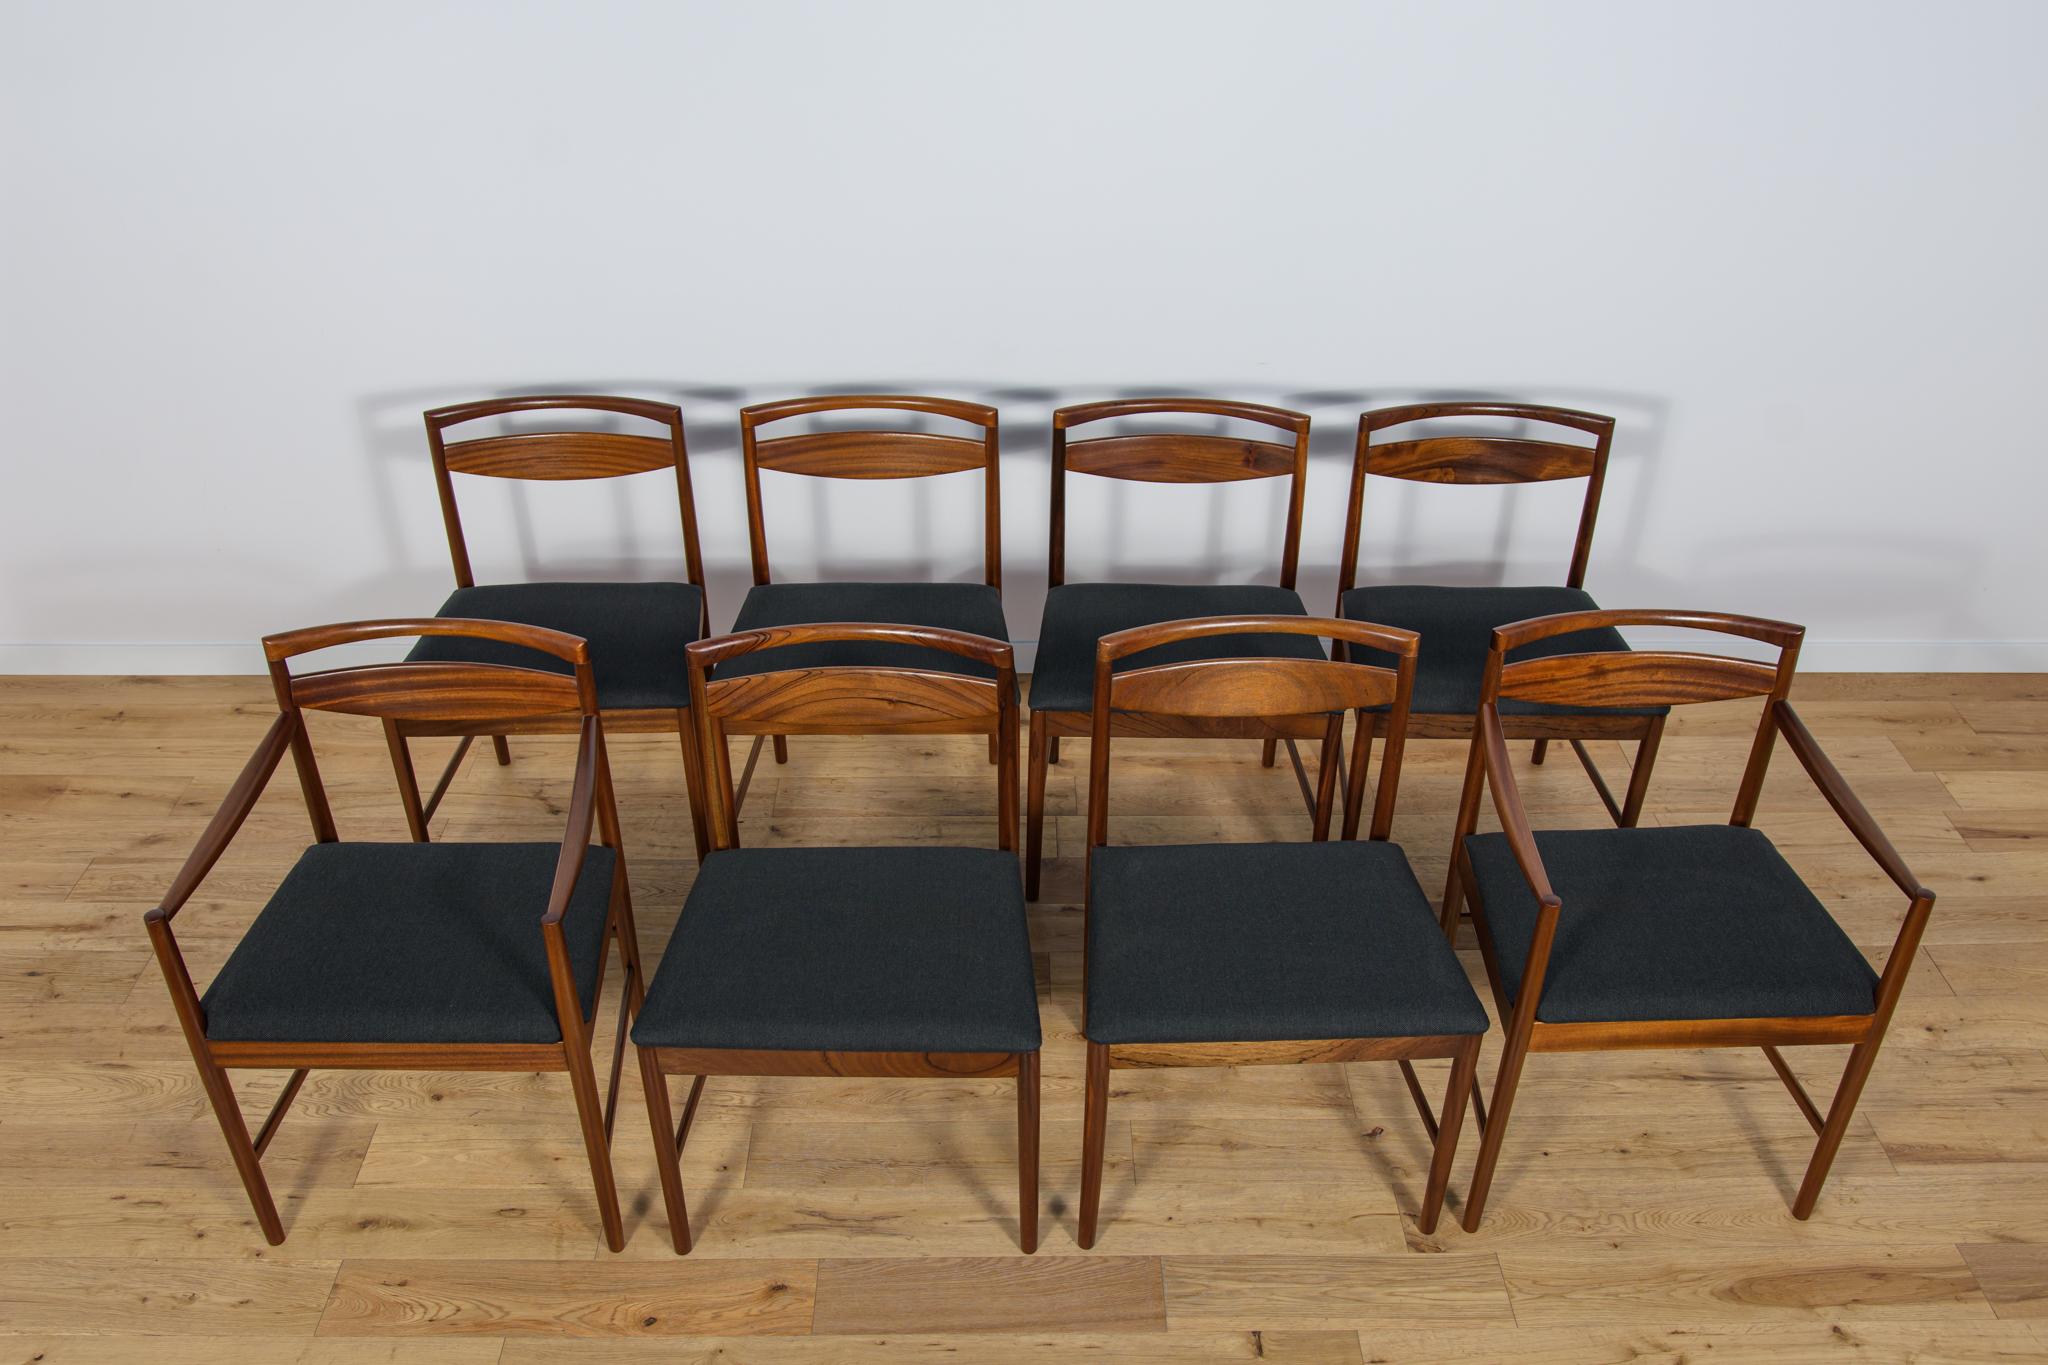 British Mid-Century Teak Model 9513 Dining Chairs by Tom Robertson for McIntosh, 1970s. For Sale